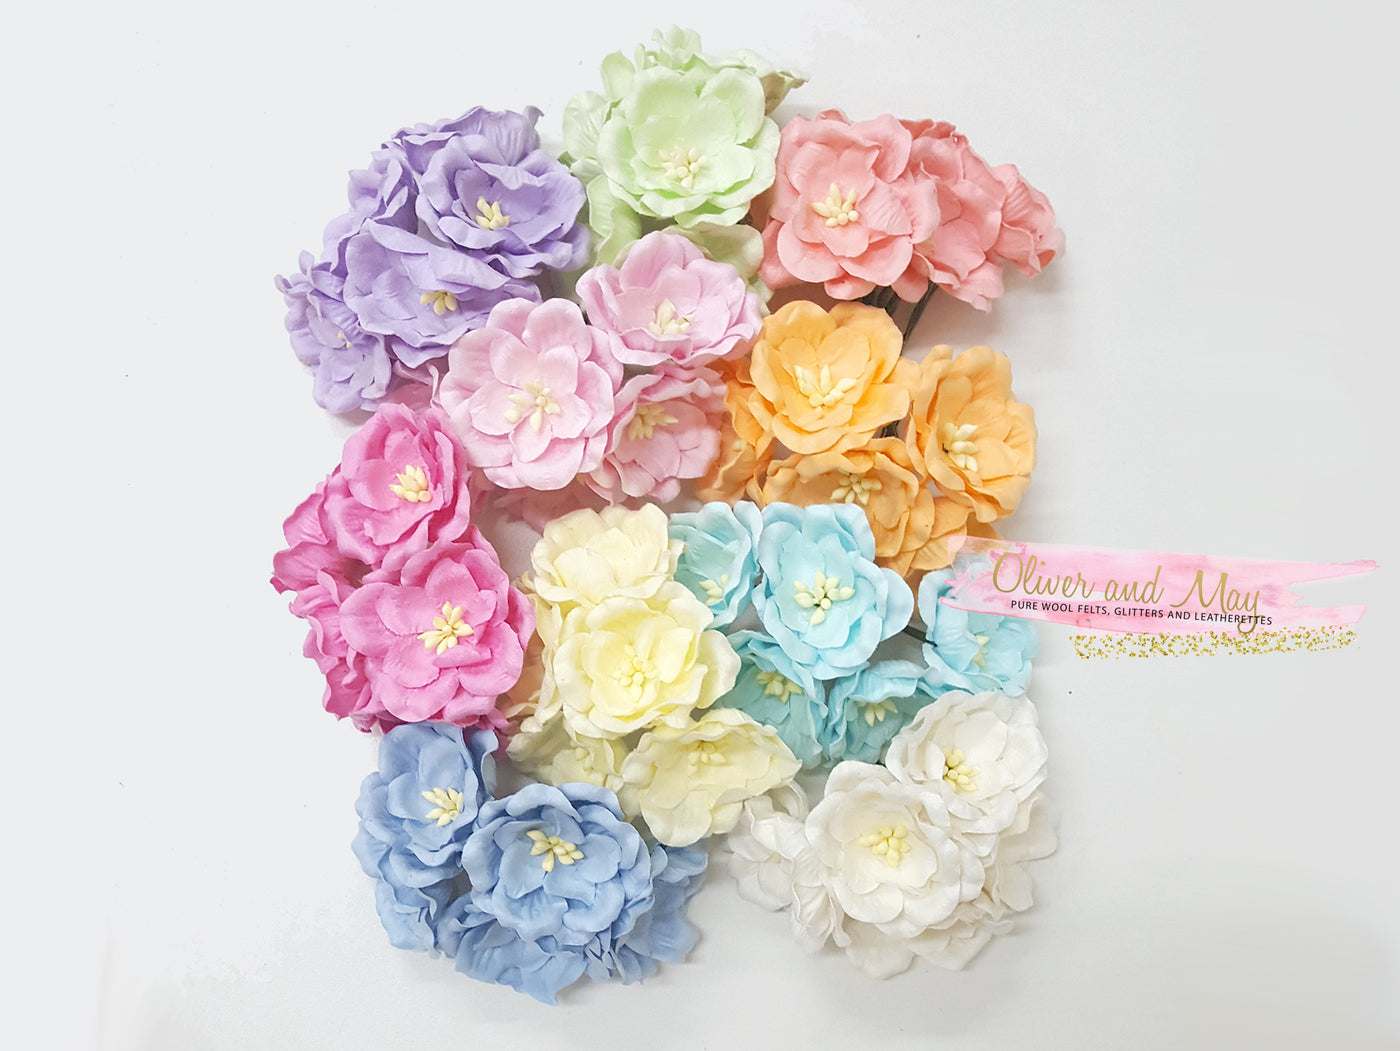 Bulk 50 Pack - Mulberry Paper Flowers - 3.5cm Magnolias - Mixed Pastel Shades